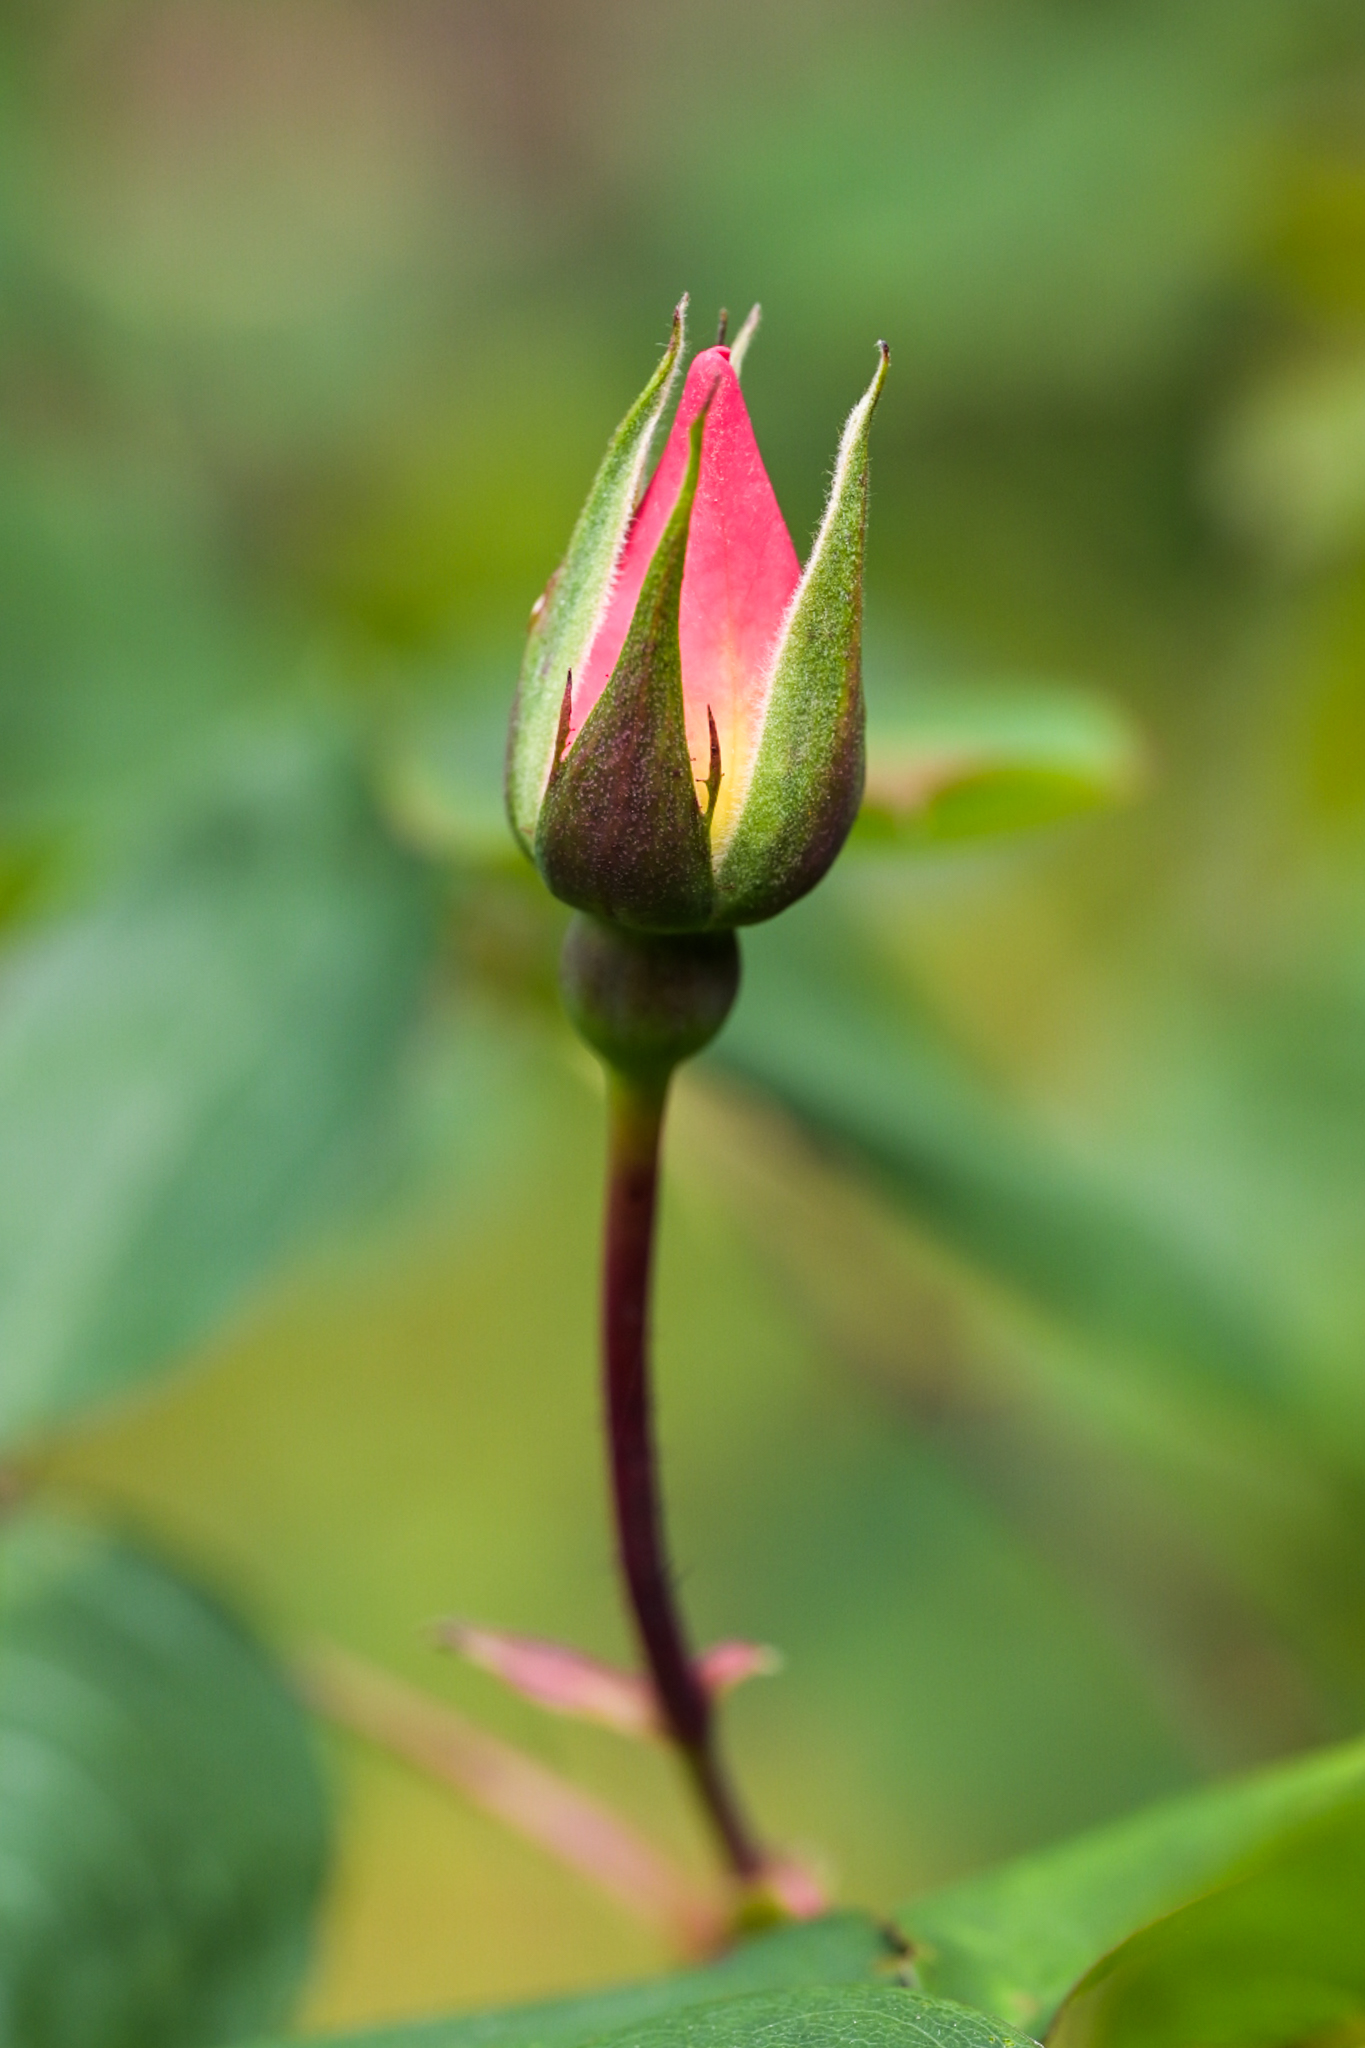 A pink rose bud starts to blossom